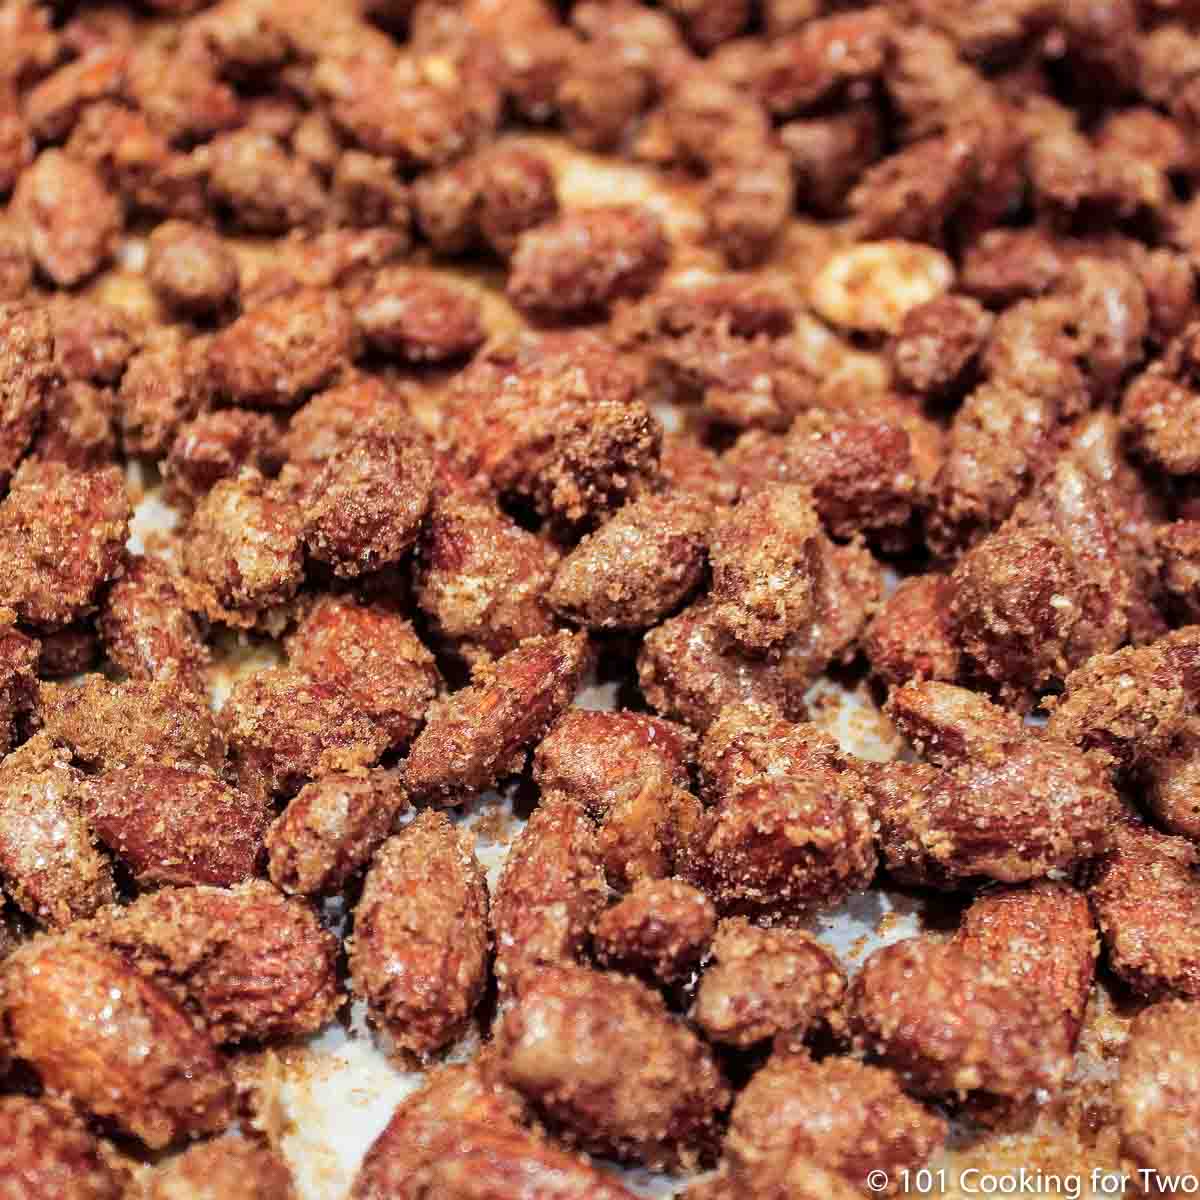 close up image finished candied nuts on the cooking tray with white parechment paper